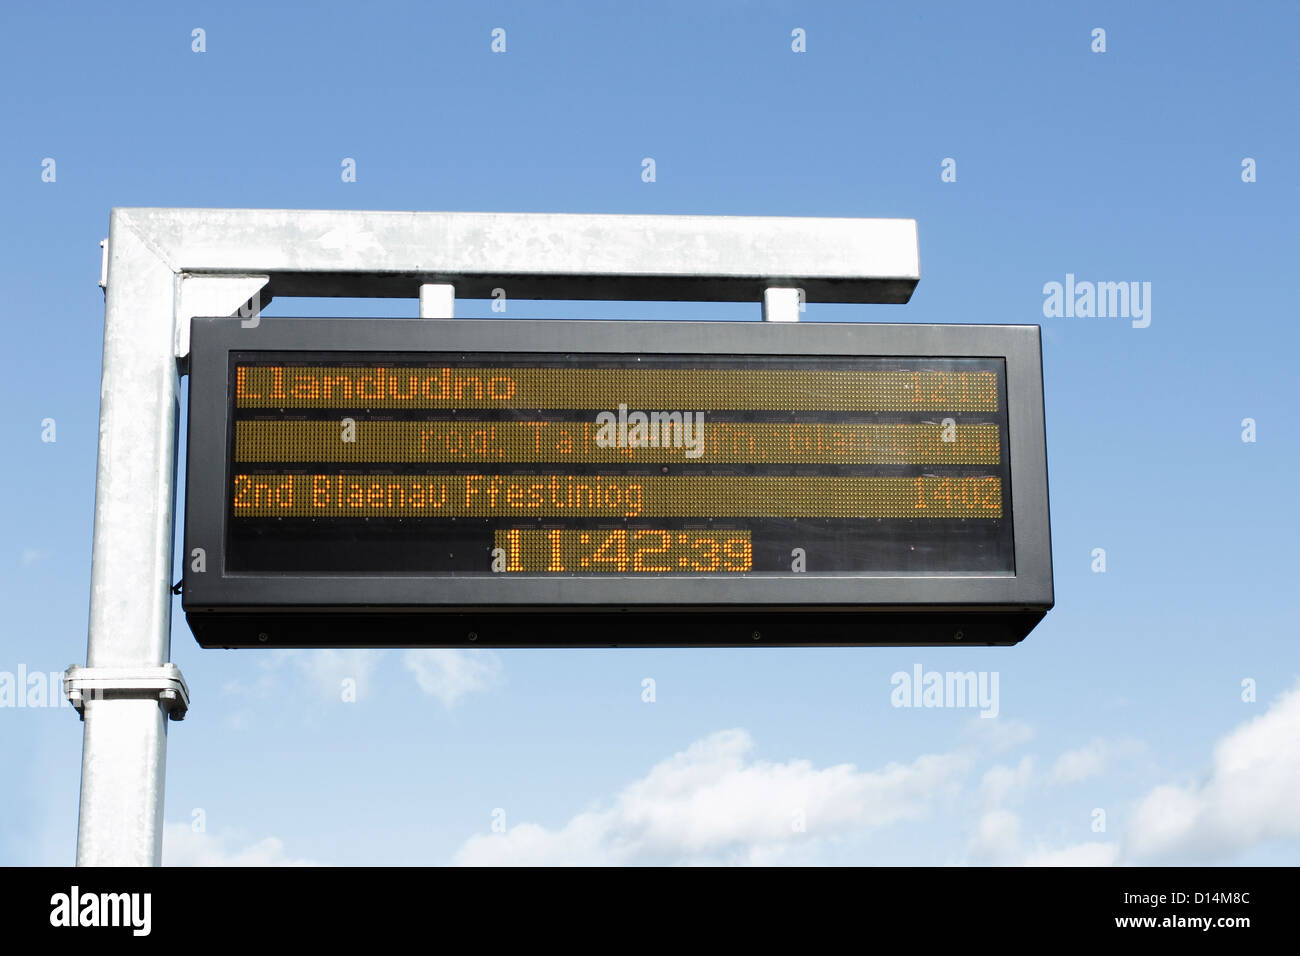 Train arrivals and departure times being shown on an electronic notice board on a railway station platform. Stock Photo